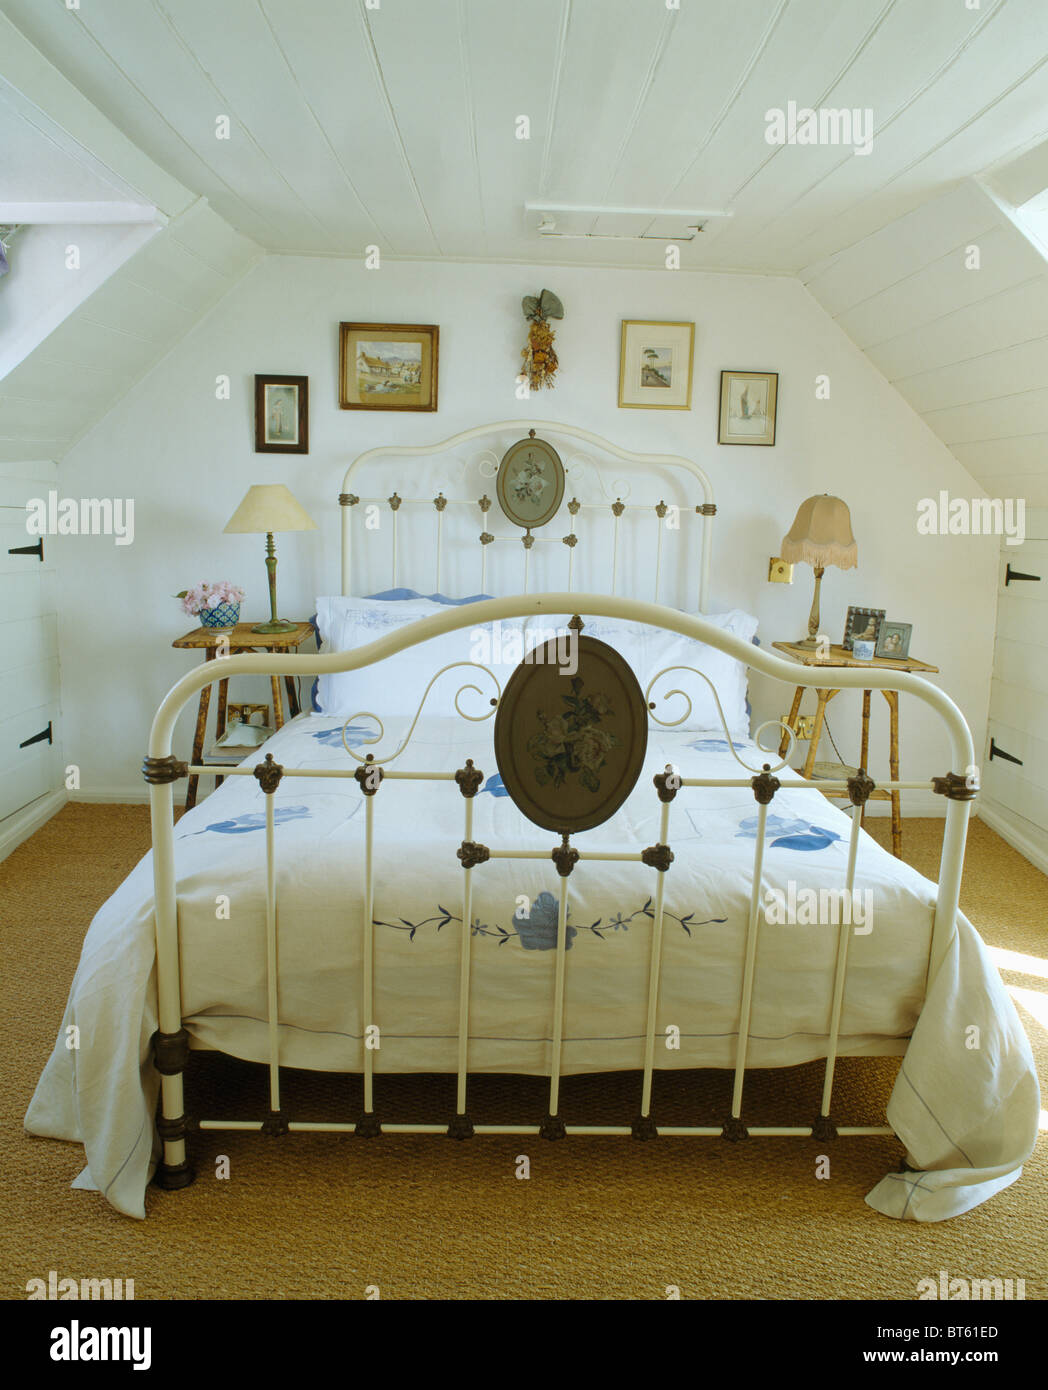 White wrought iron bed with blue+white quilt in white attic bedroom Stock Photo